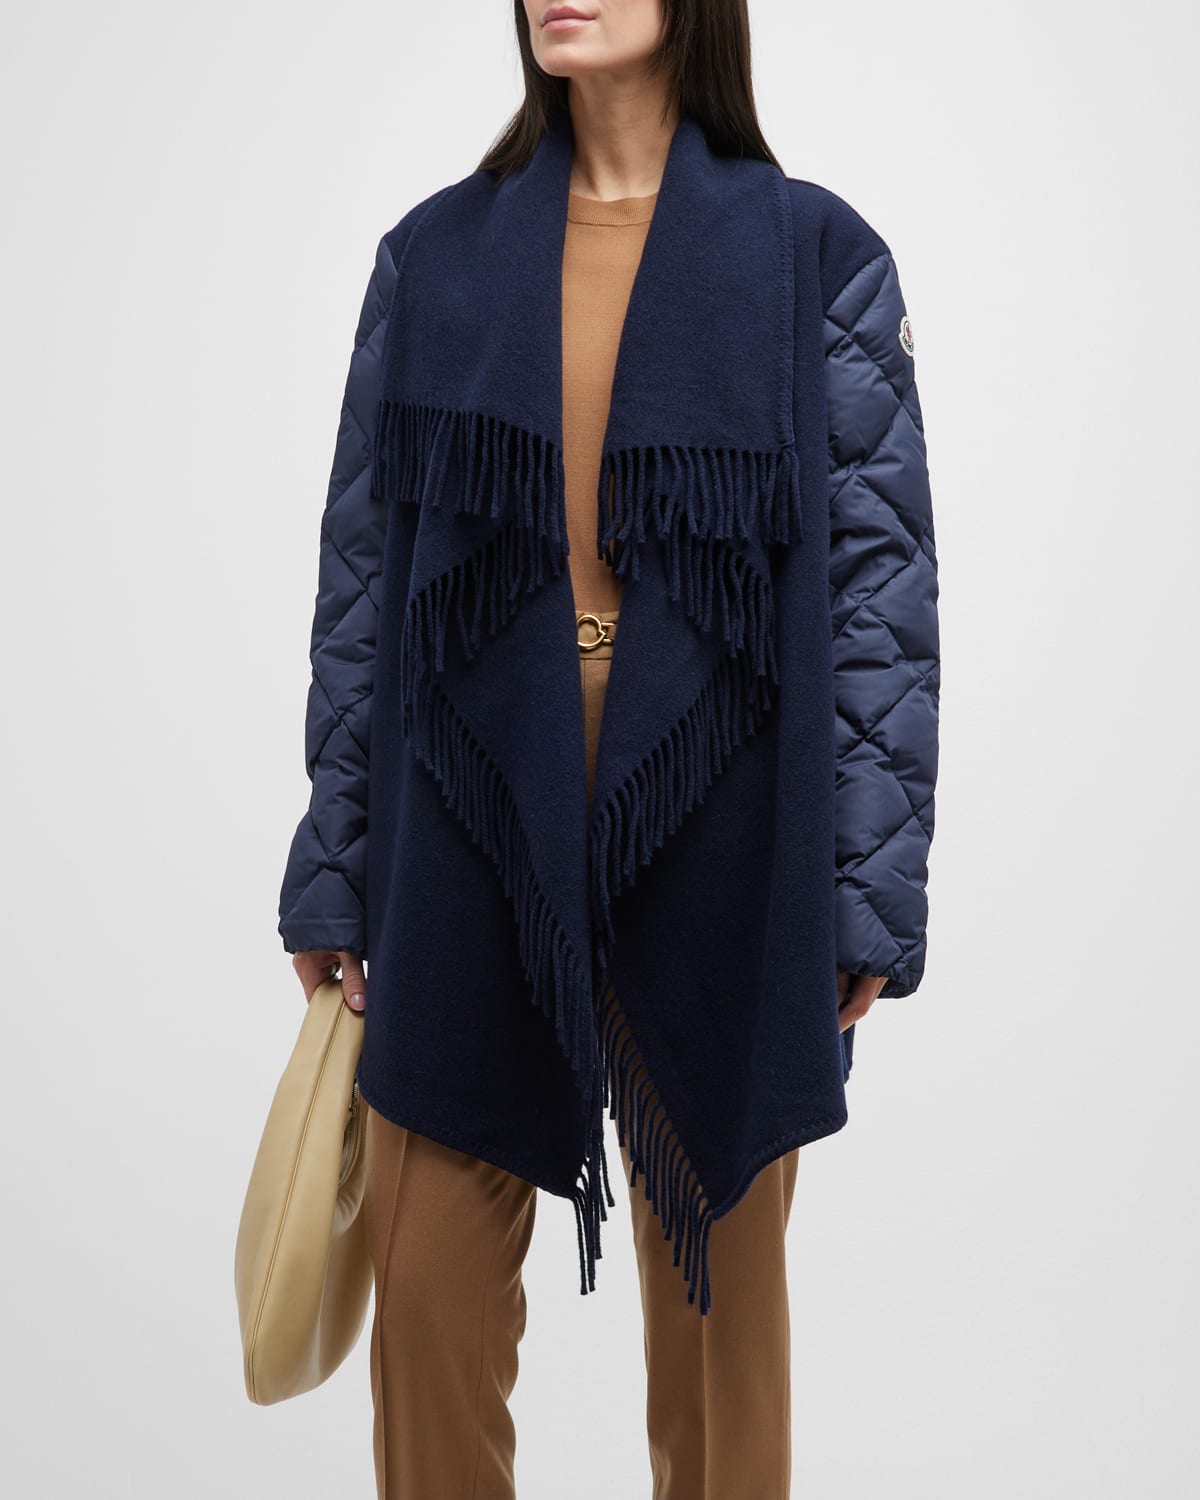 Moncler Cape Front Mixed Media Jacket In Navy